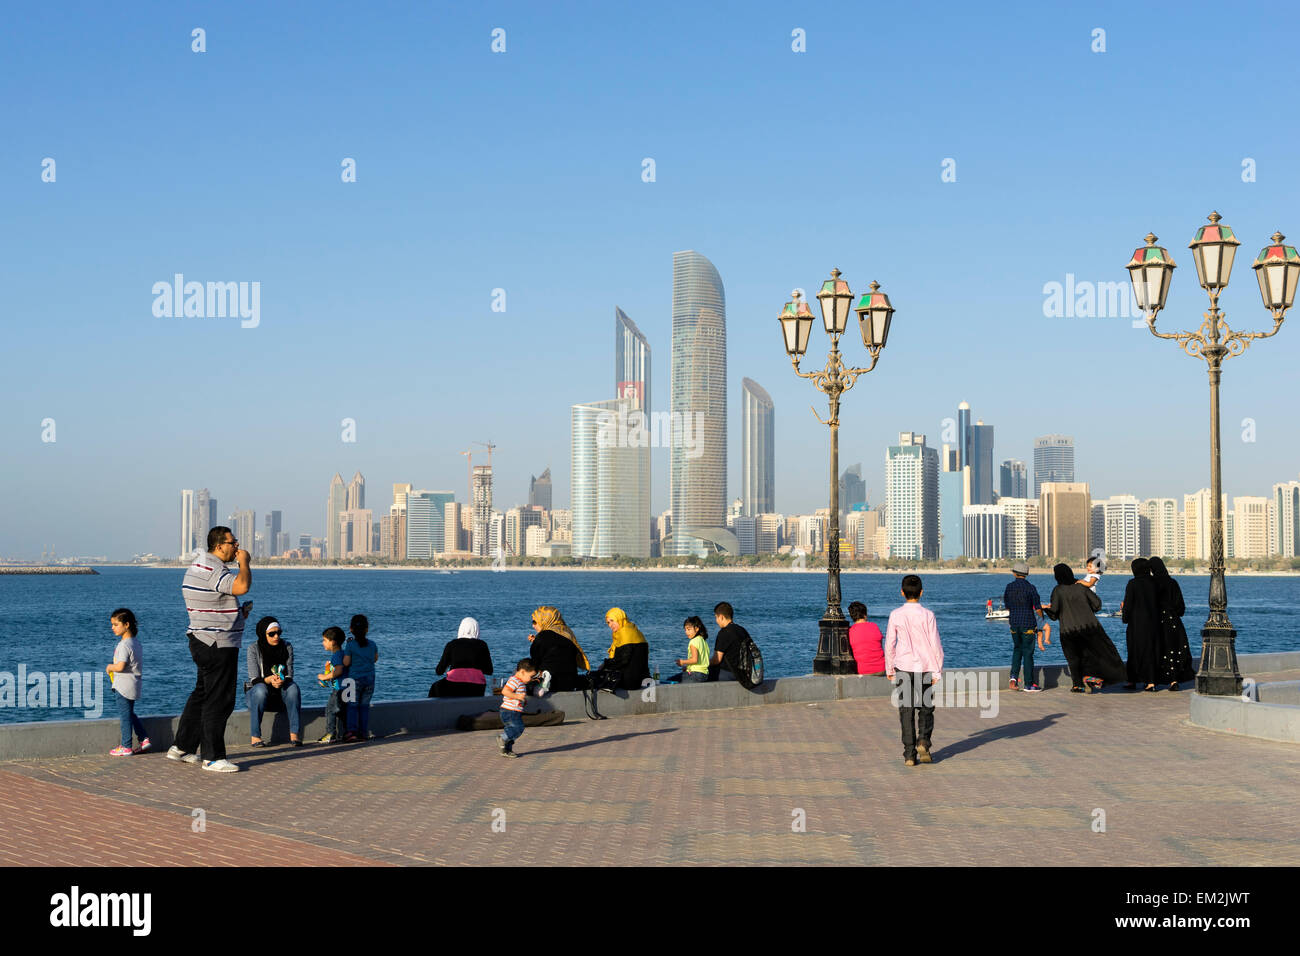 Daytime skyline view and local people in Abu Dhabi in United Arab Emirates Stock Photo